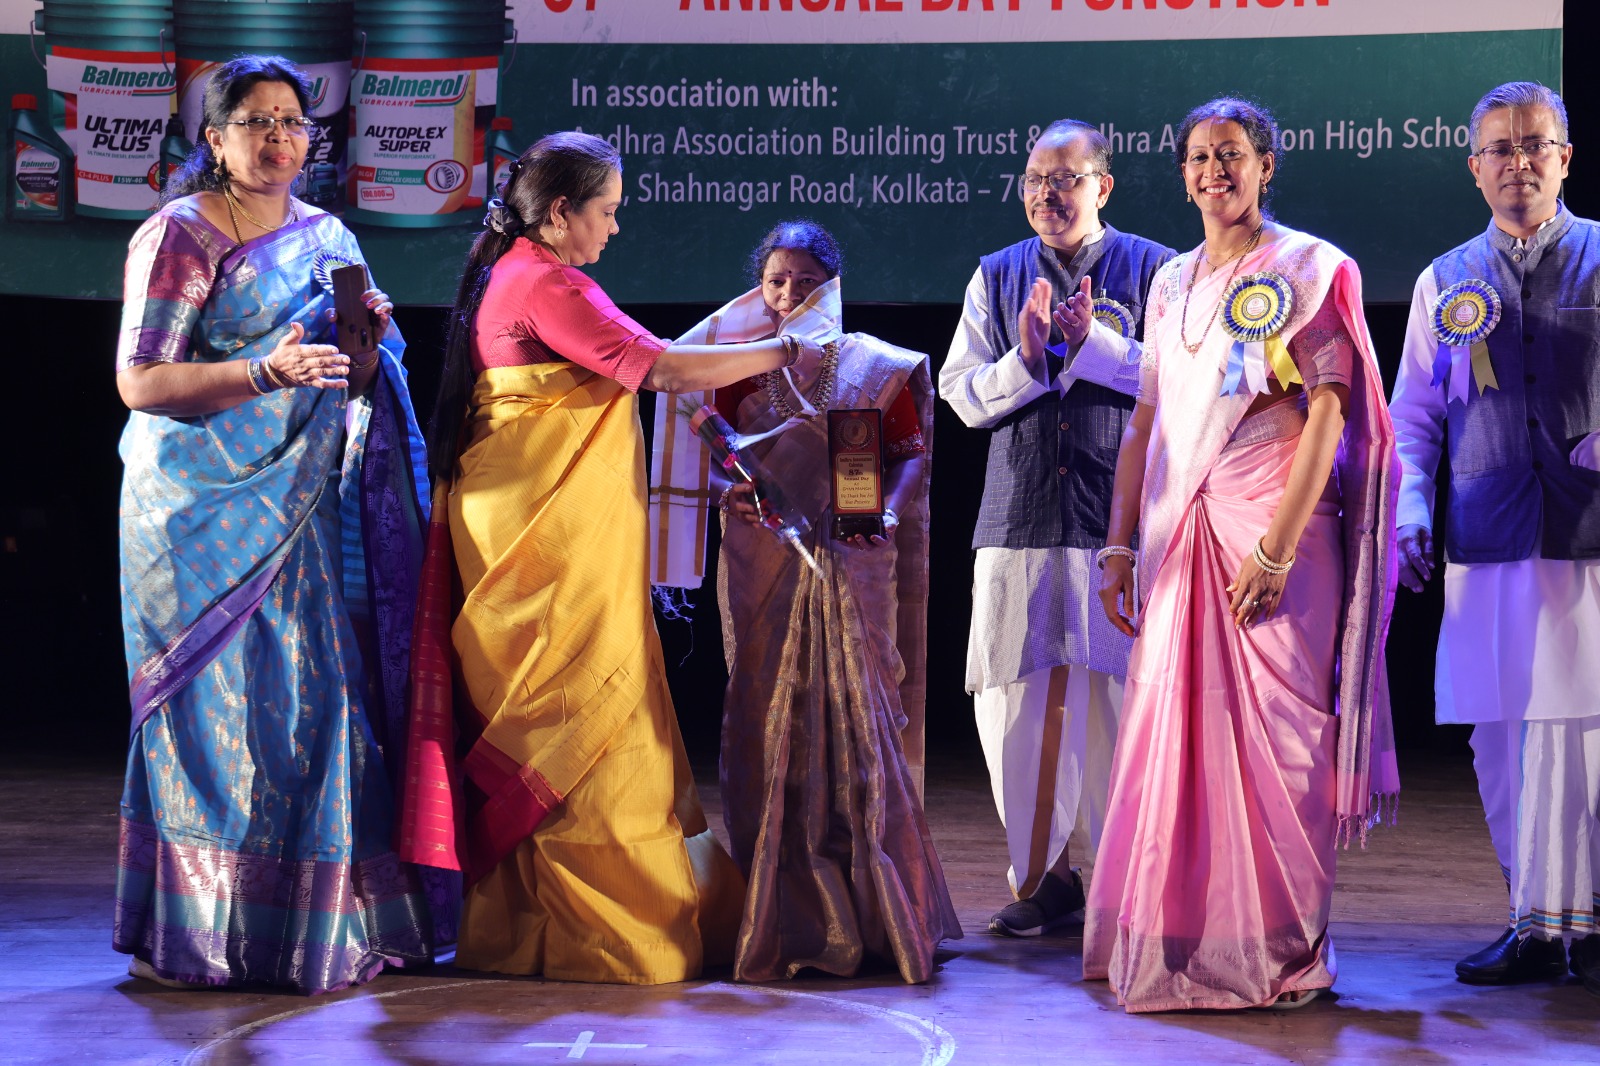 87th Annual Day Celebrations 